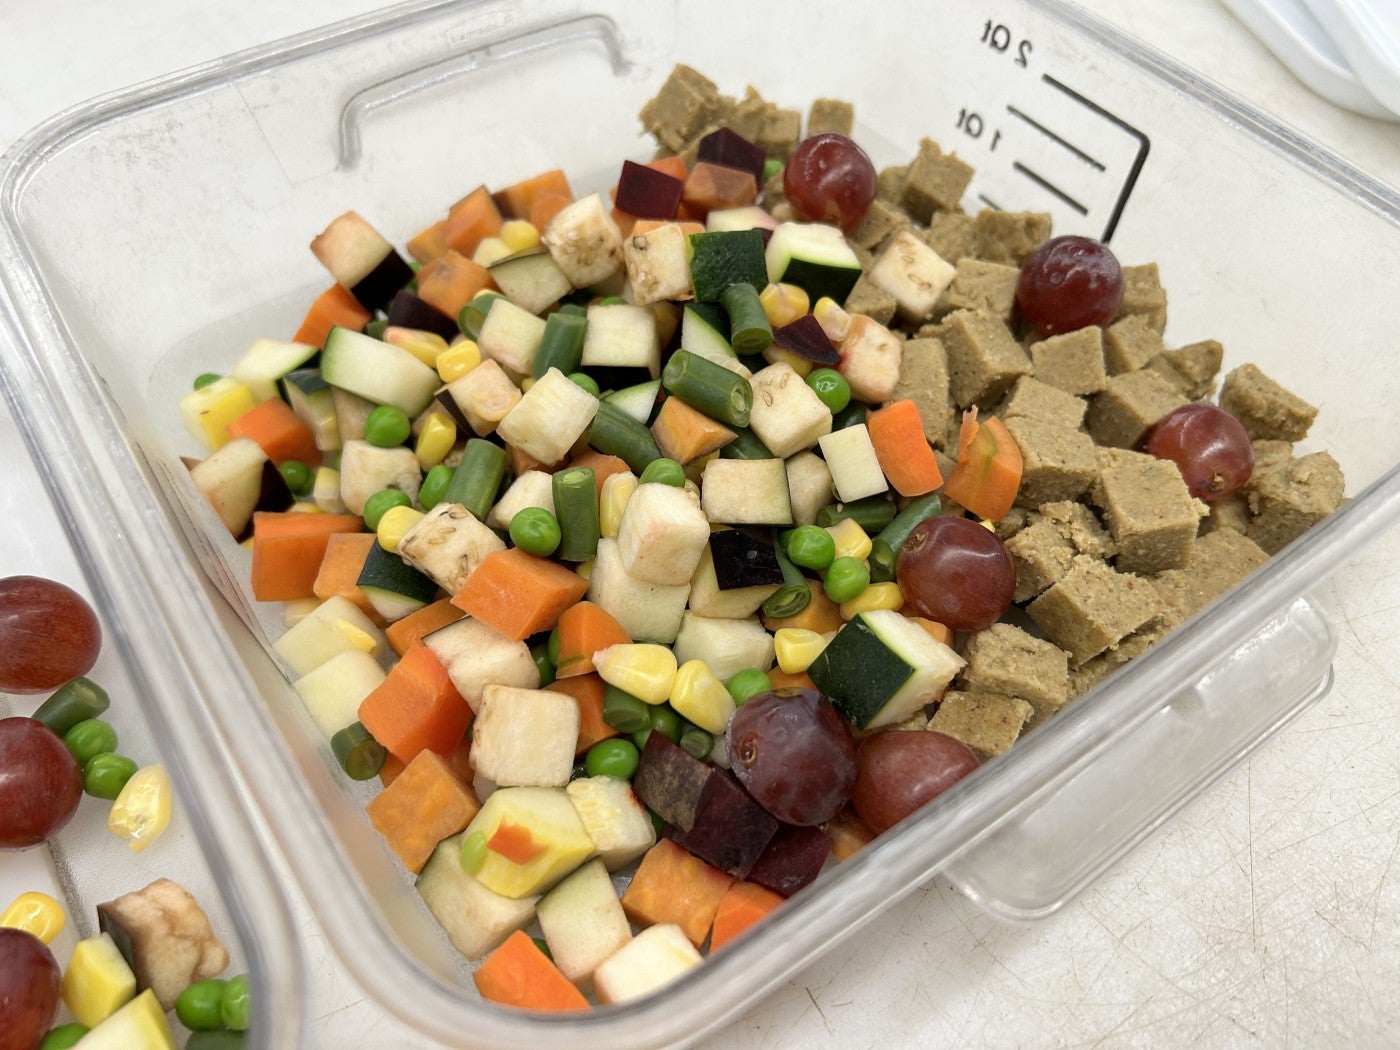 Photo of a plastic container filled with a variety of cubed vegetables, several grapes, and specialty animal food. 